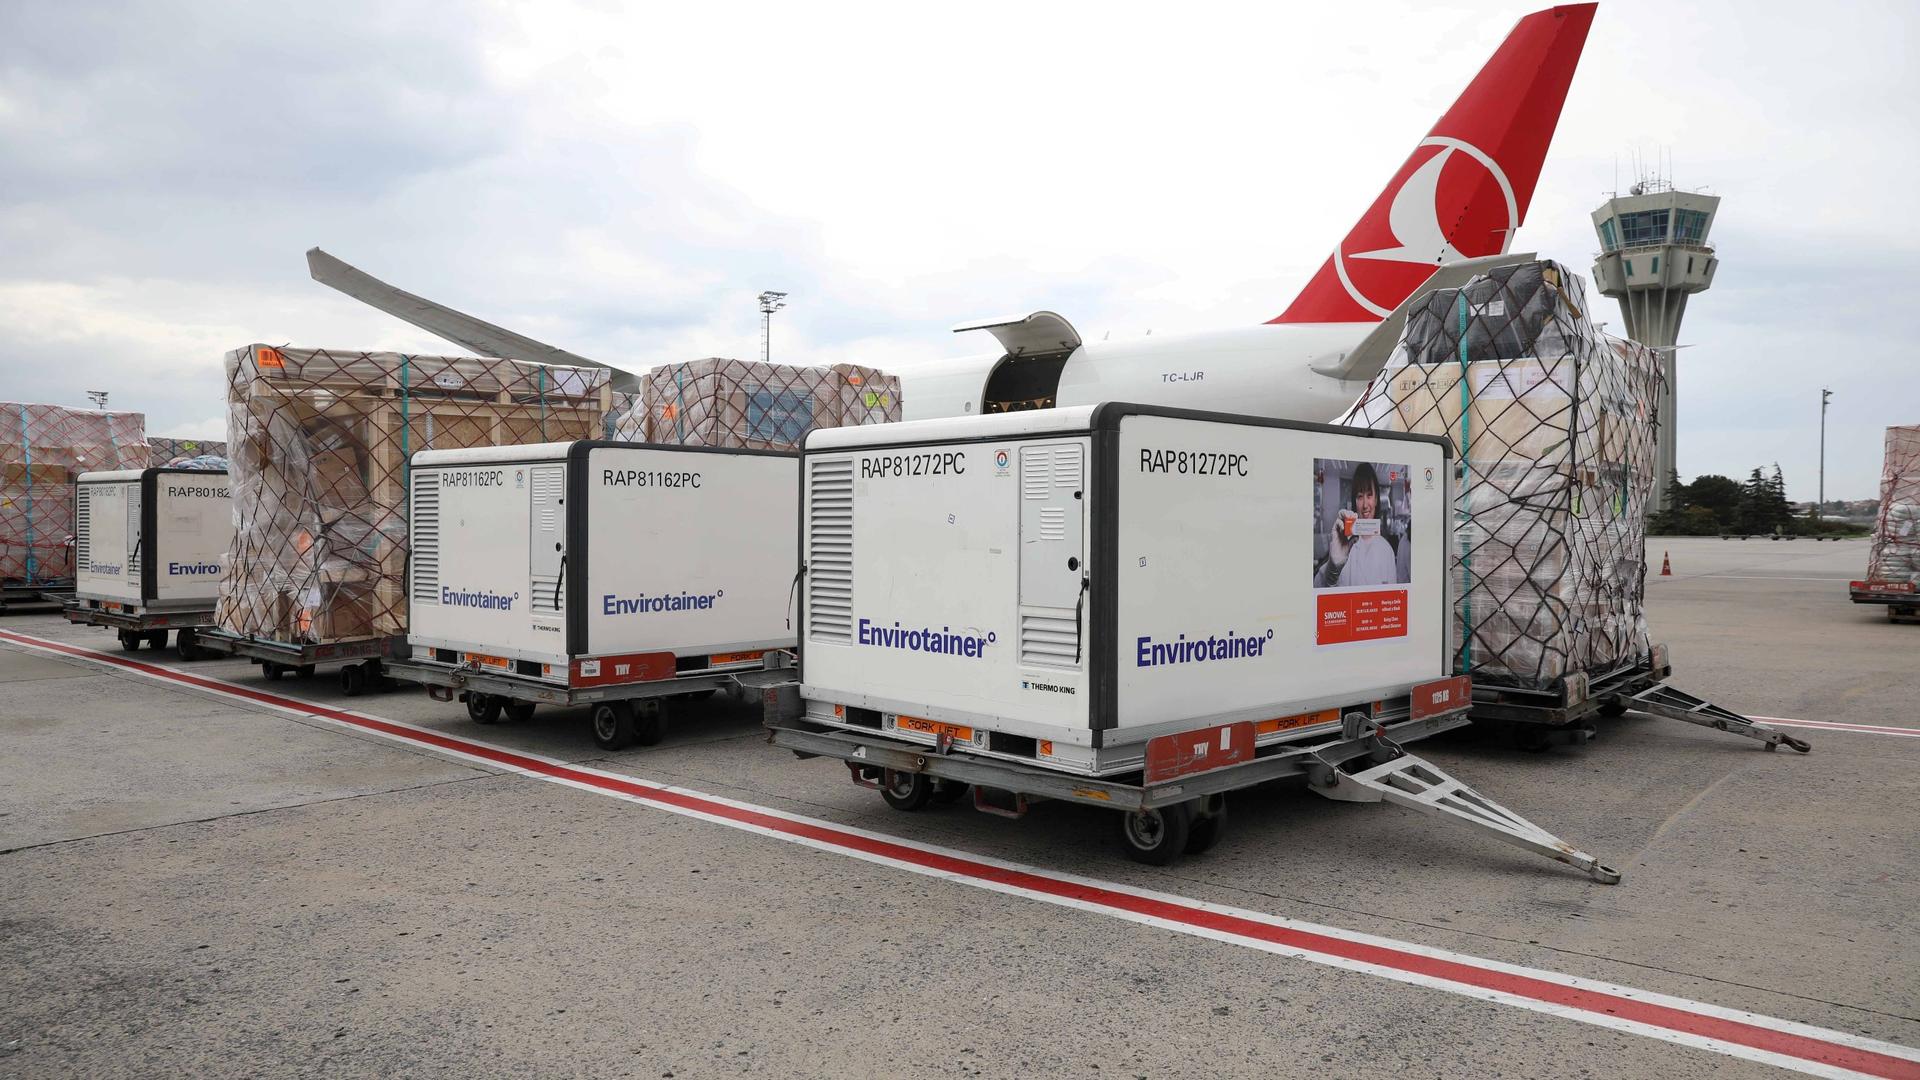 Active temperature control containers carrying China's Sinovac experimental COVID-19 vaccines are loaded onto a Turkish Cargo plane at Ataturk airport before departing to Brazil, in Istanbul, Turkey, Nov. 18, 2020.